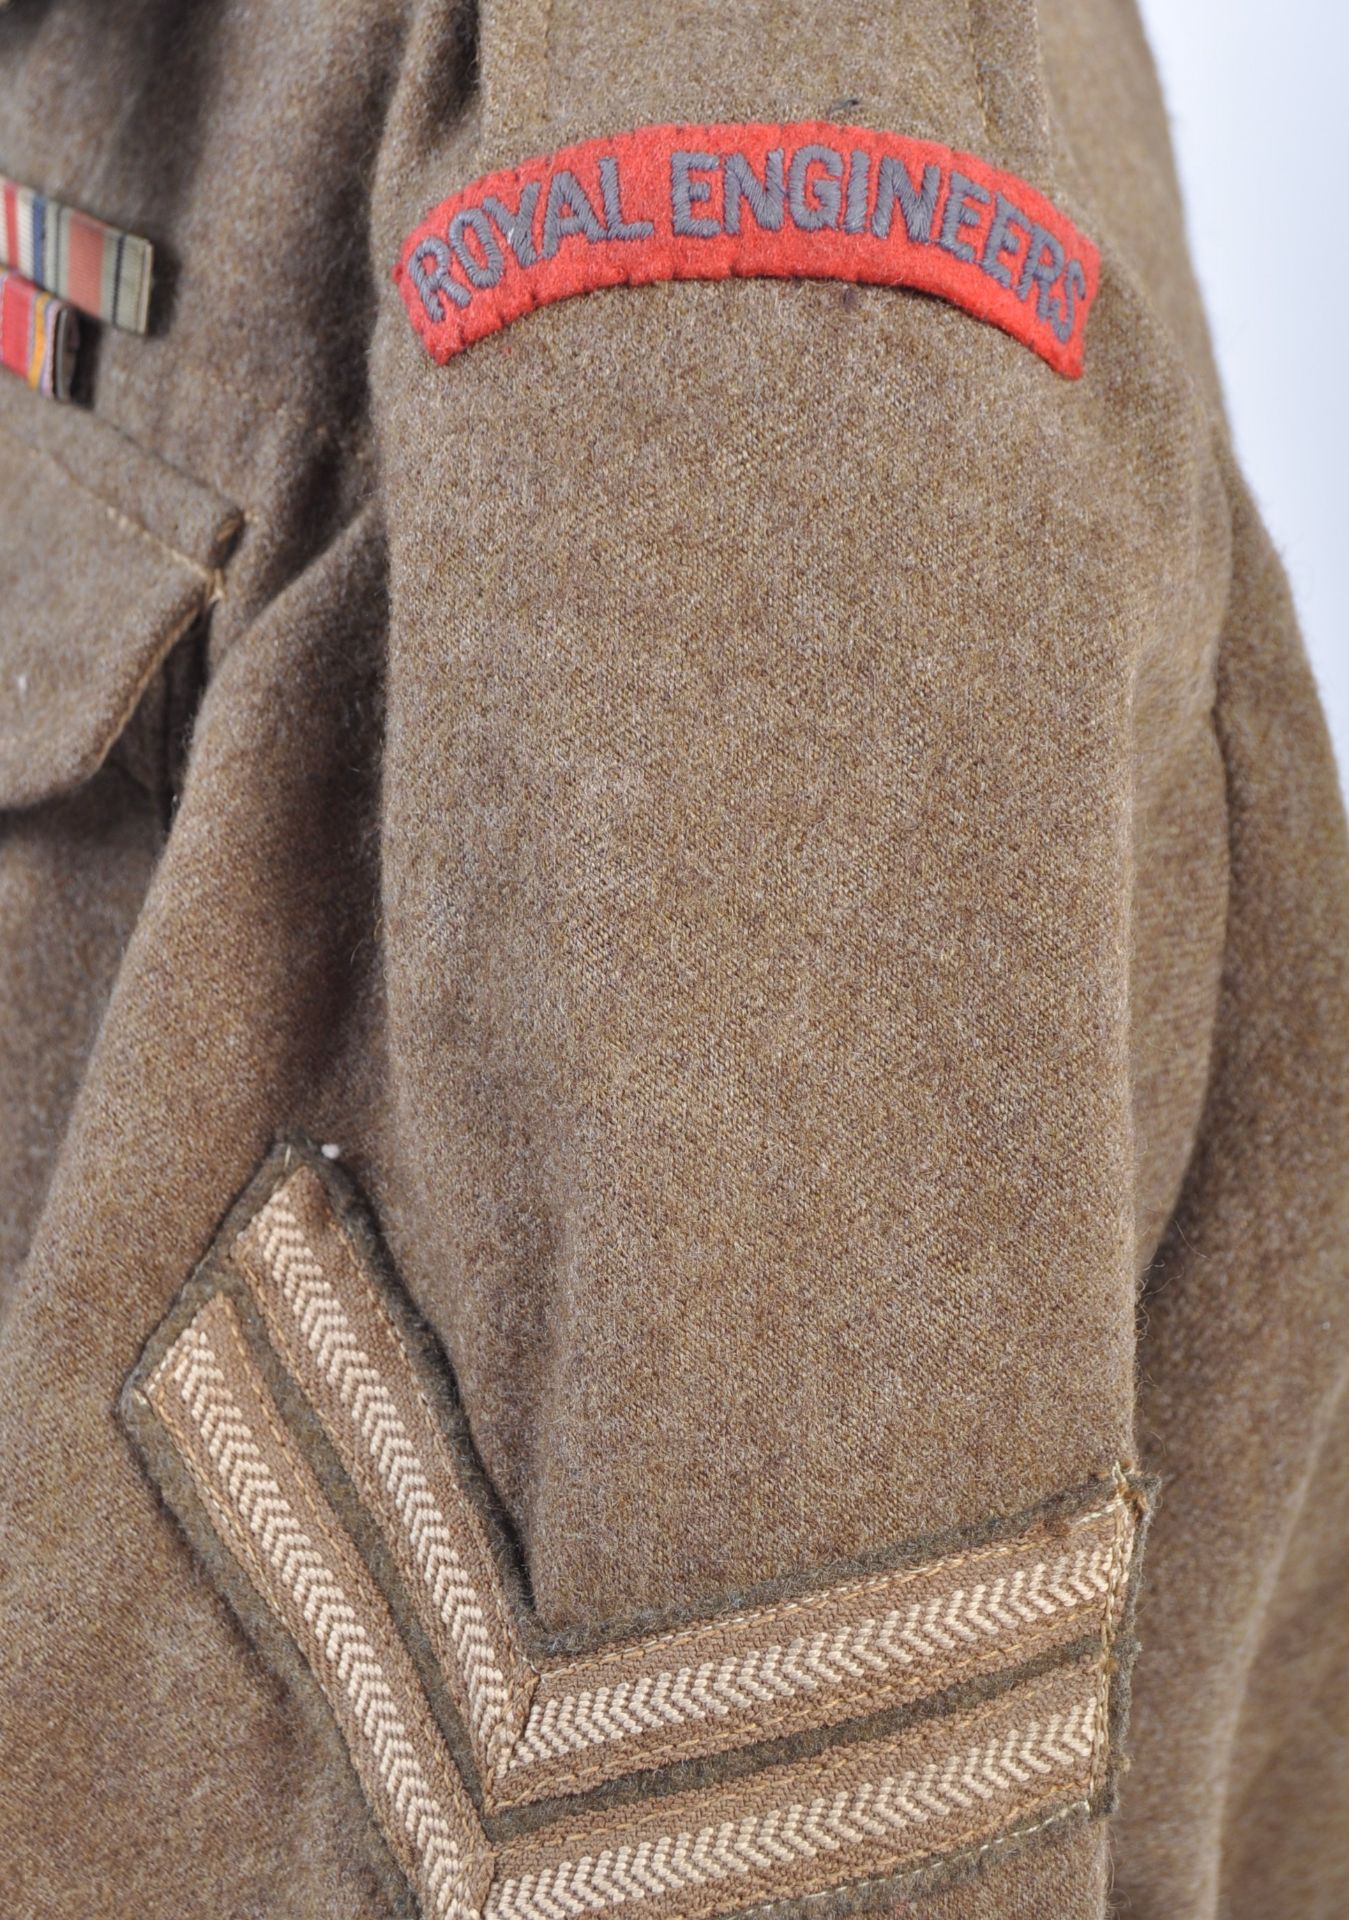 A BRITISH ROYAL ENGINEERS UNIFORM TUNIC AND MEDAL GROUP - Image 4 of 6